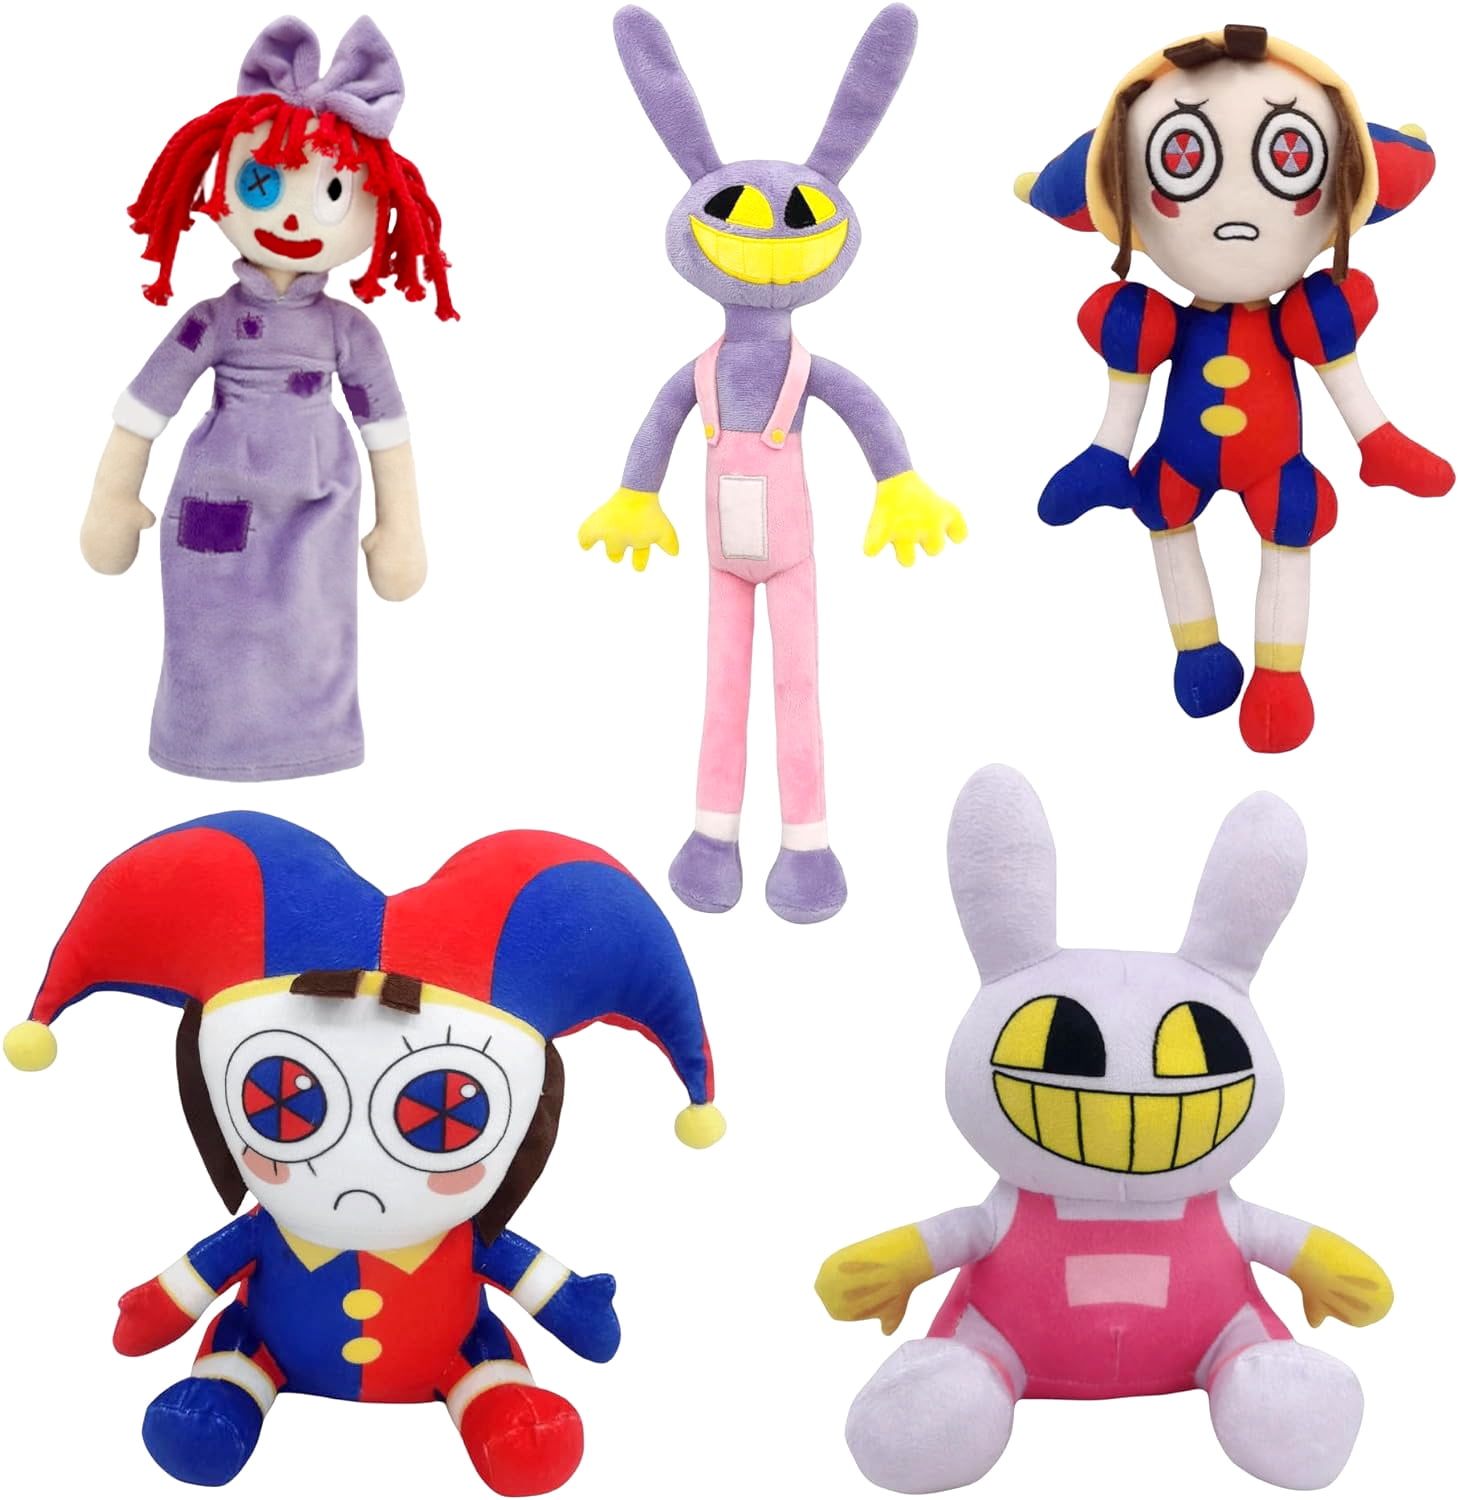  PLSDOIT The Amazing Digital Circus Plush,Pomni and Jax Cute  Stuffed Figure Doll.Birthday Halloween Christmas As Gifts for Adults and  Children（2PCS） : Toys & Games